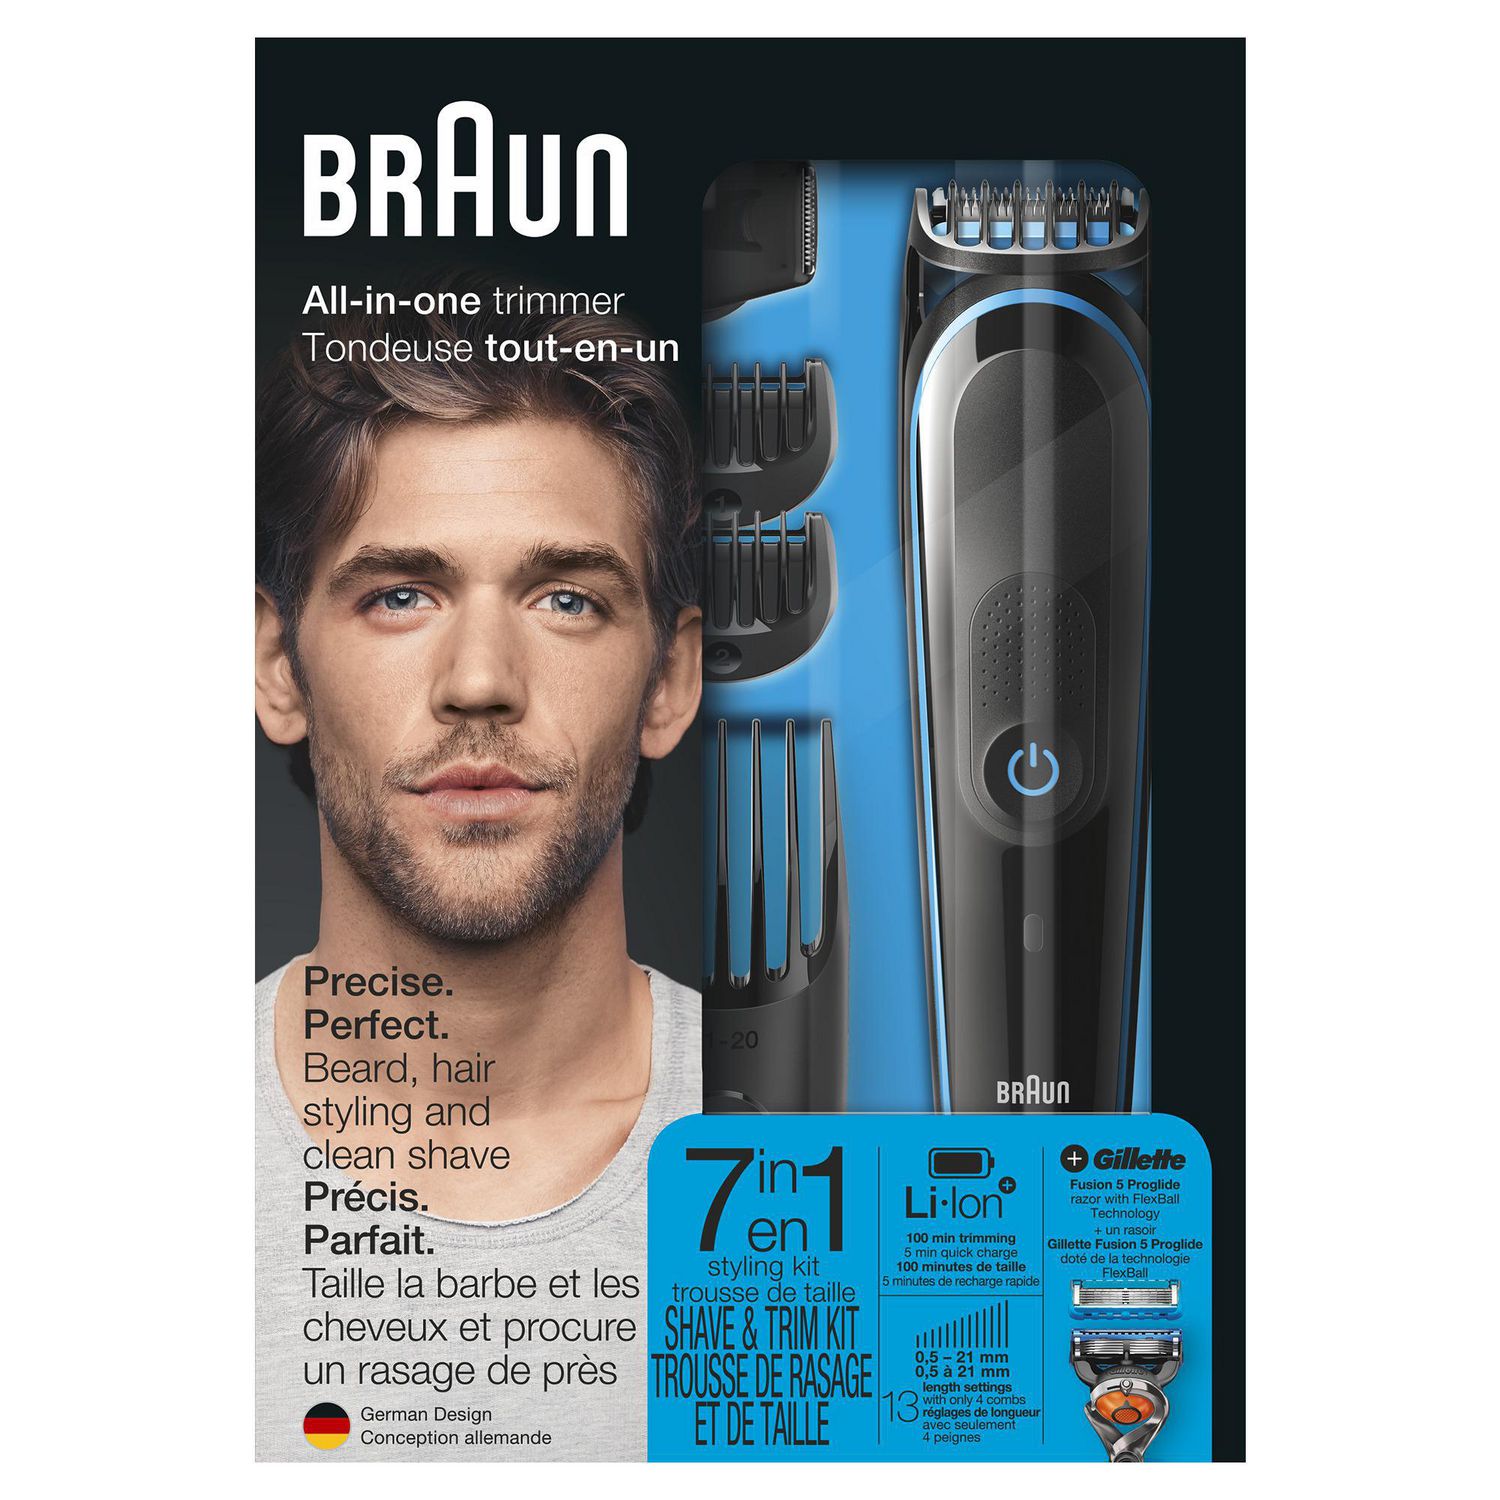 braun all in one hair trimmer